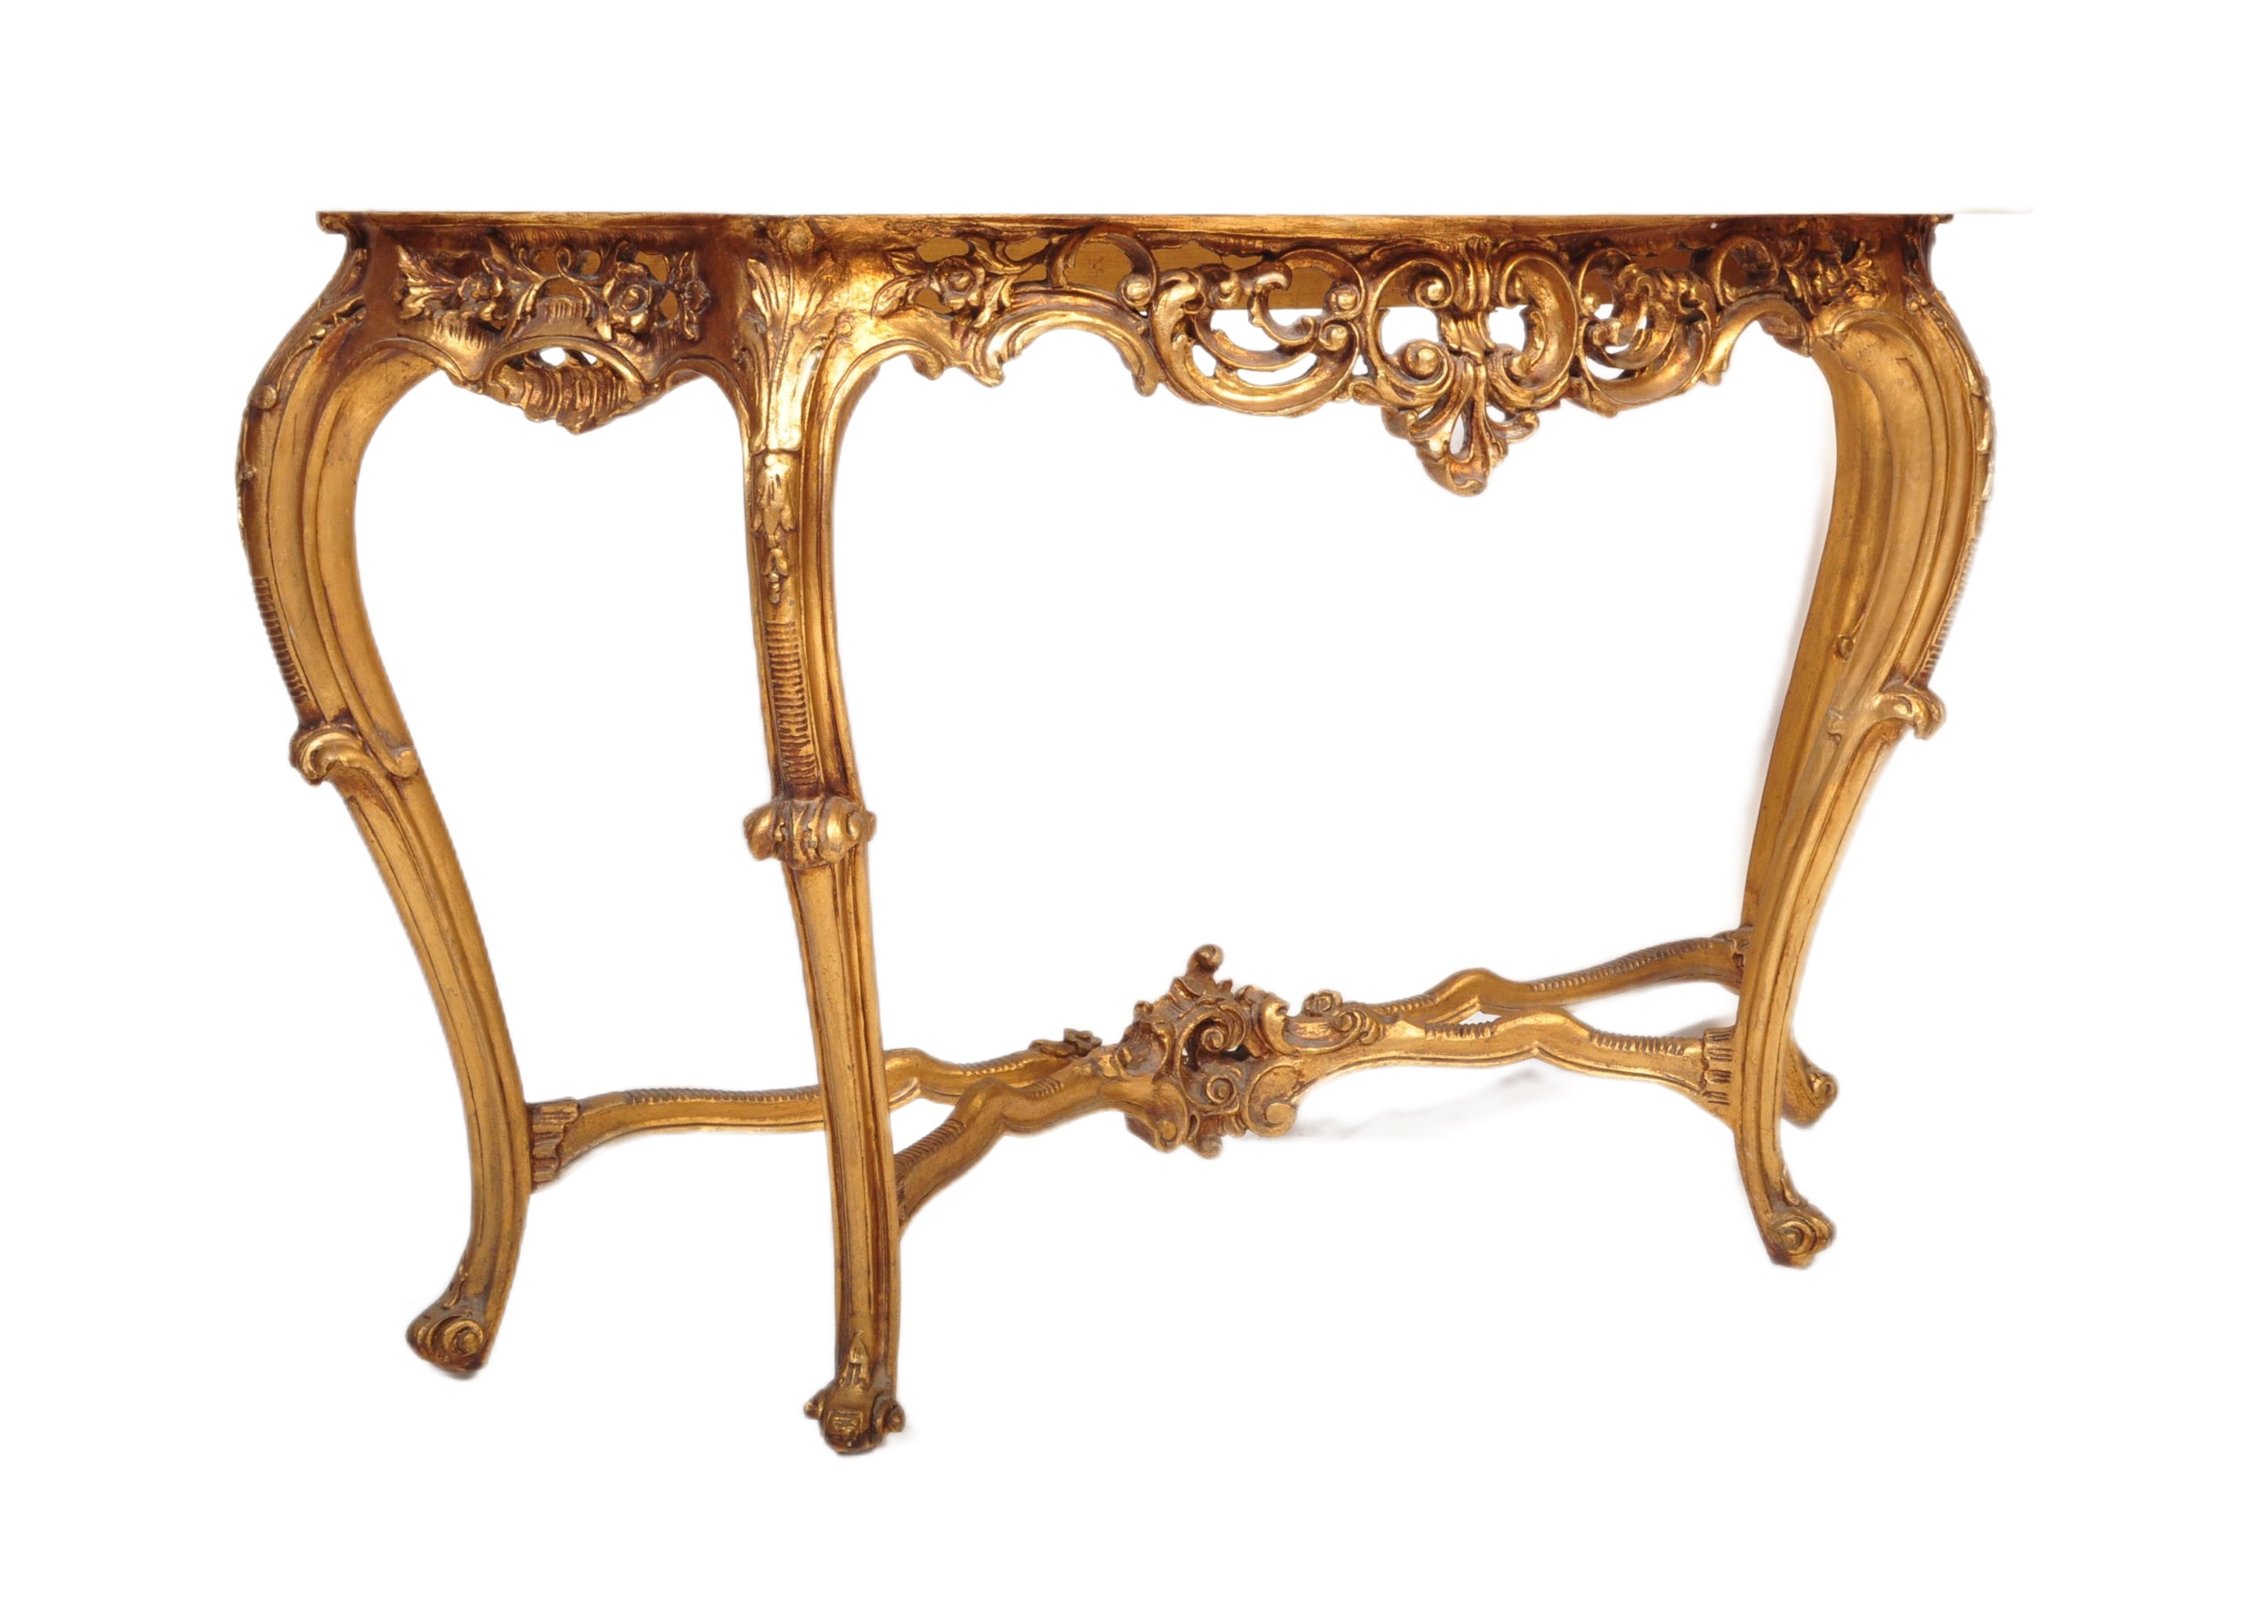 20TH CENTURY ROCOCO STYLE MARBLE & GILT CONSOLE TABLE